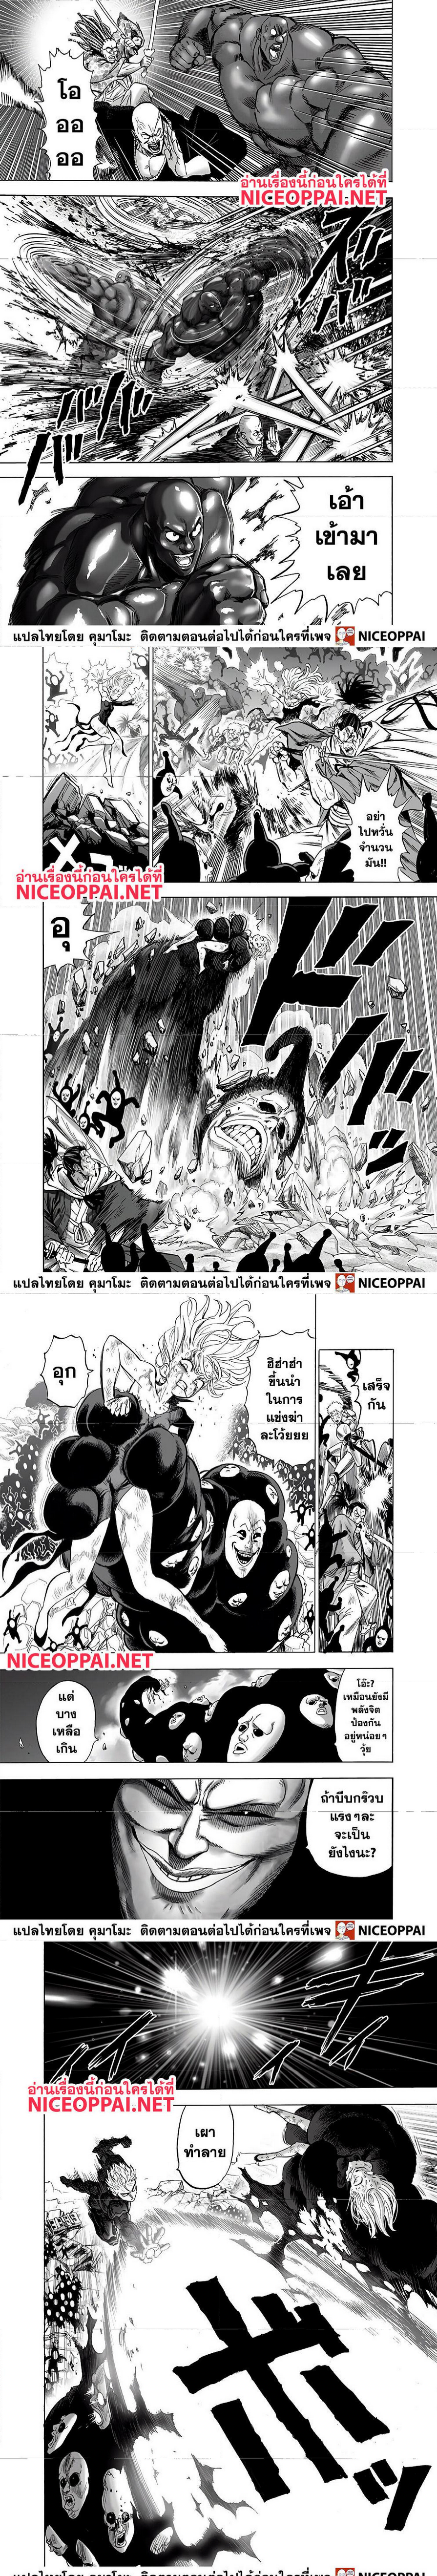 One Punch Man147 (3)